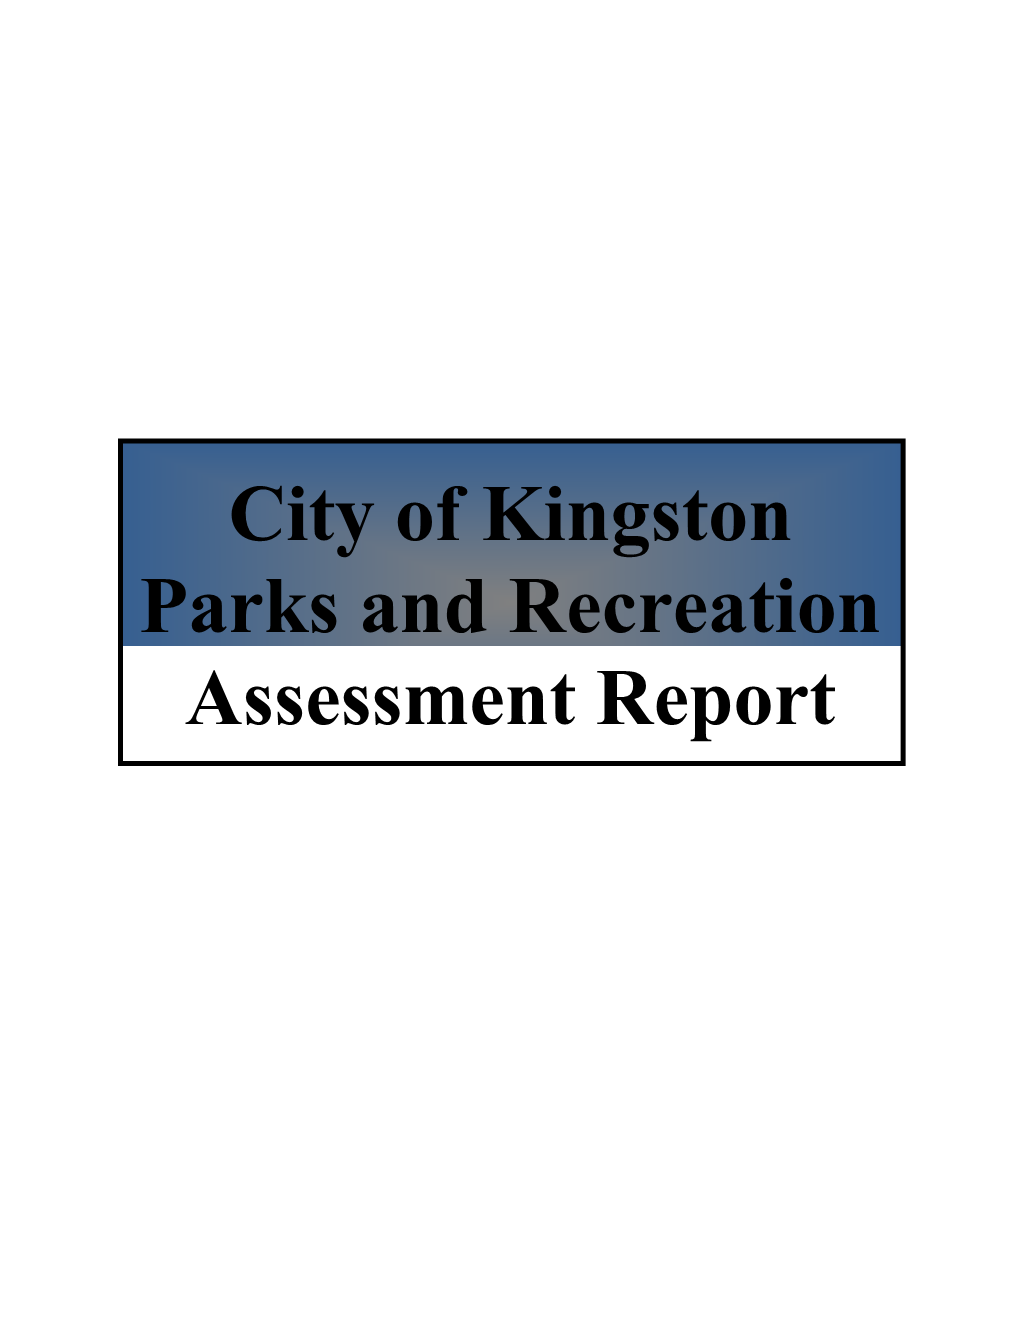 City of Kingston Parks and Recreation Assessment Report